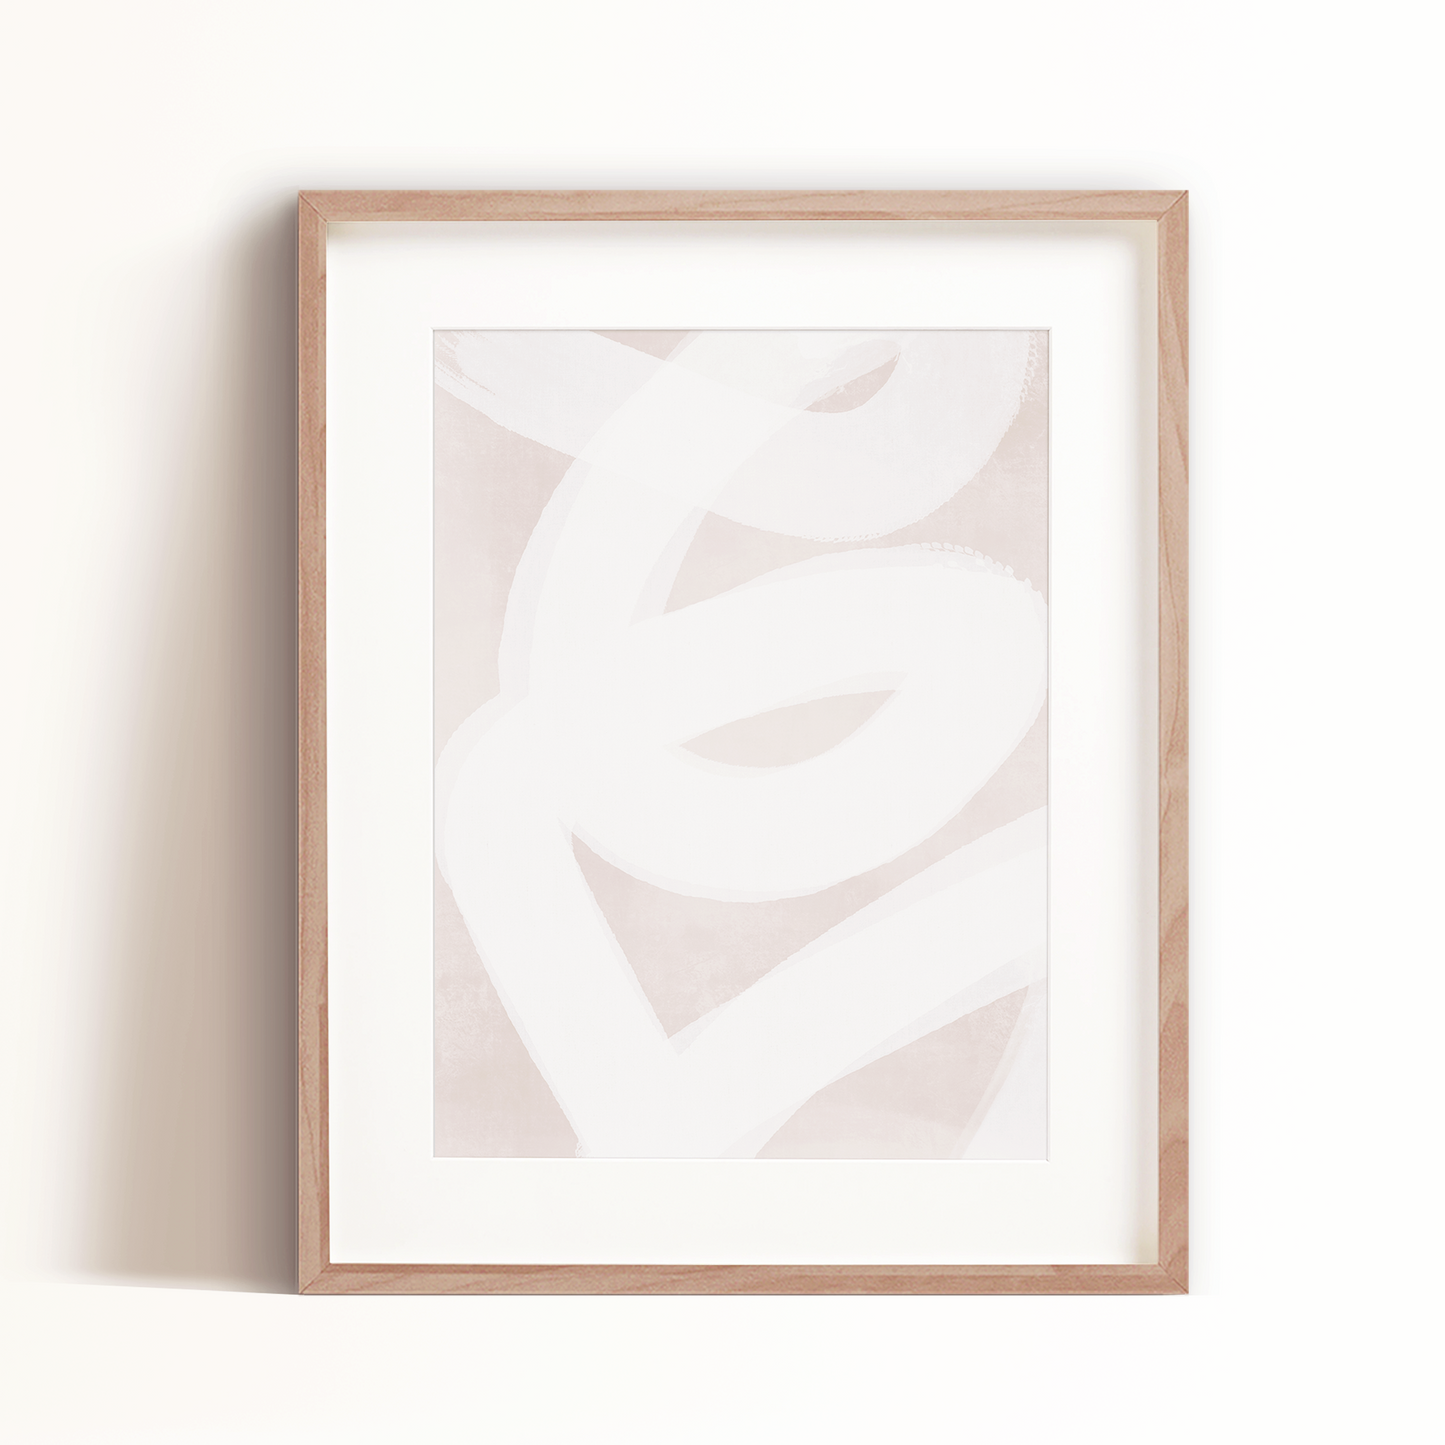 Abstract Lines Art Print